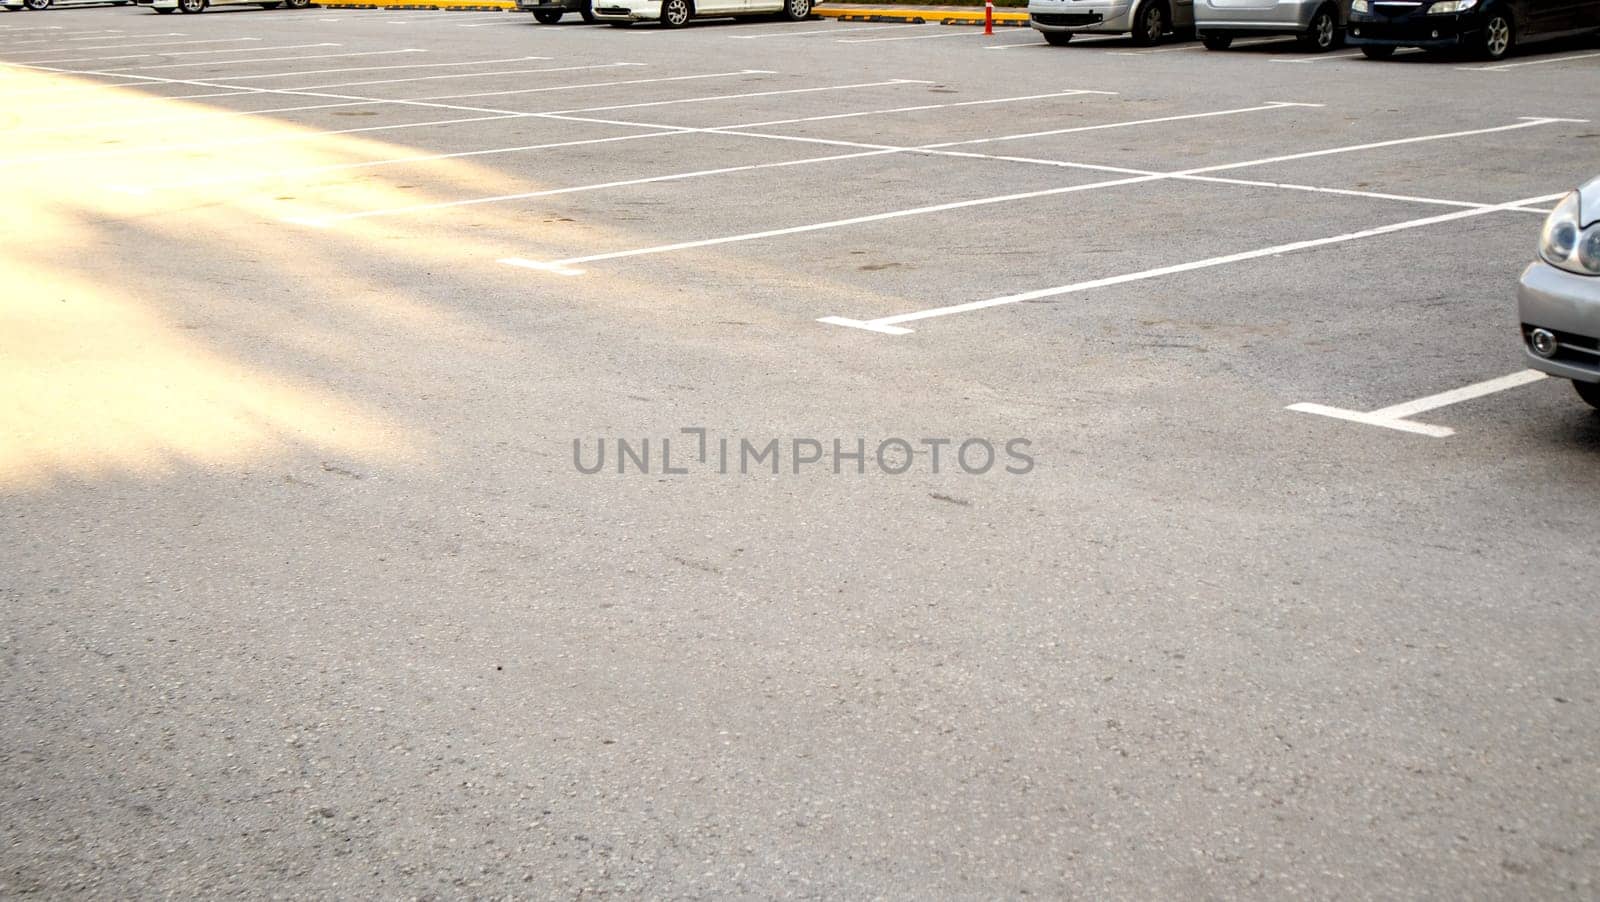 Car parking with white markings on the asphalt, close-up by claire_lucia